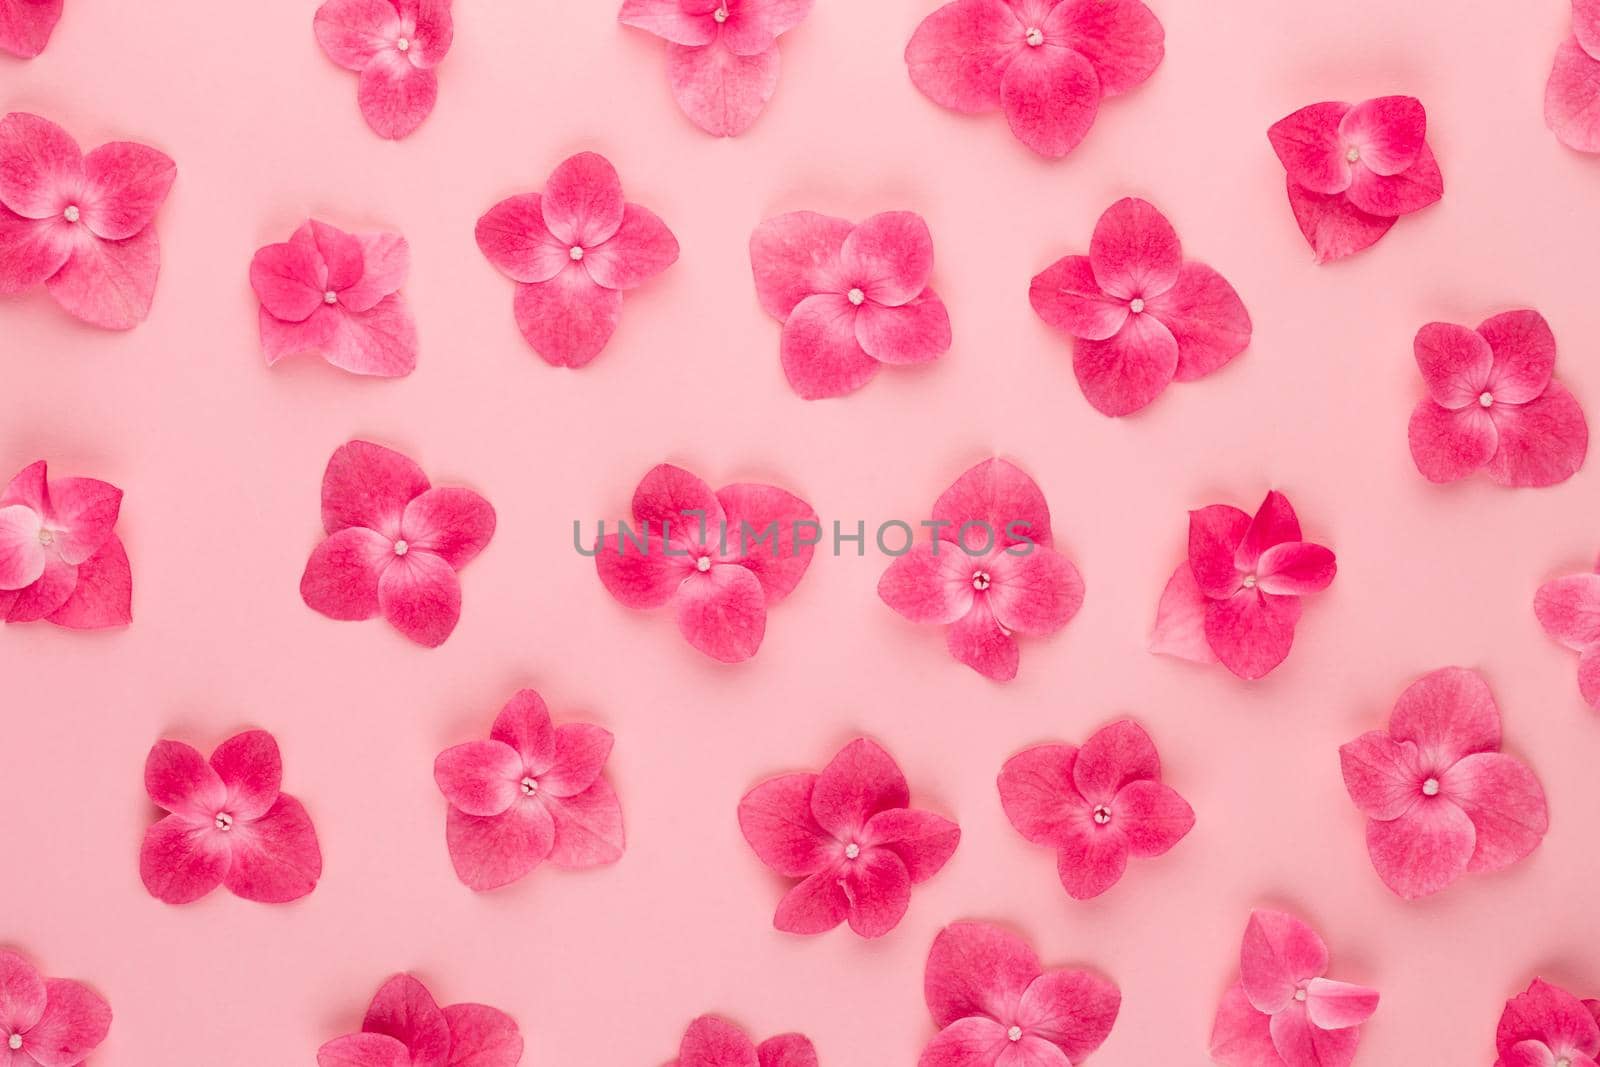 Flowers composition. Pattern made of pink flowers background. Flat lay, top view, copy space.